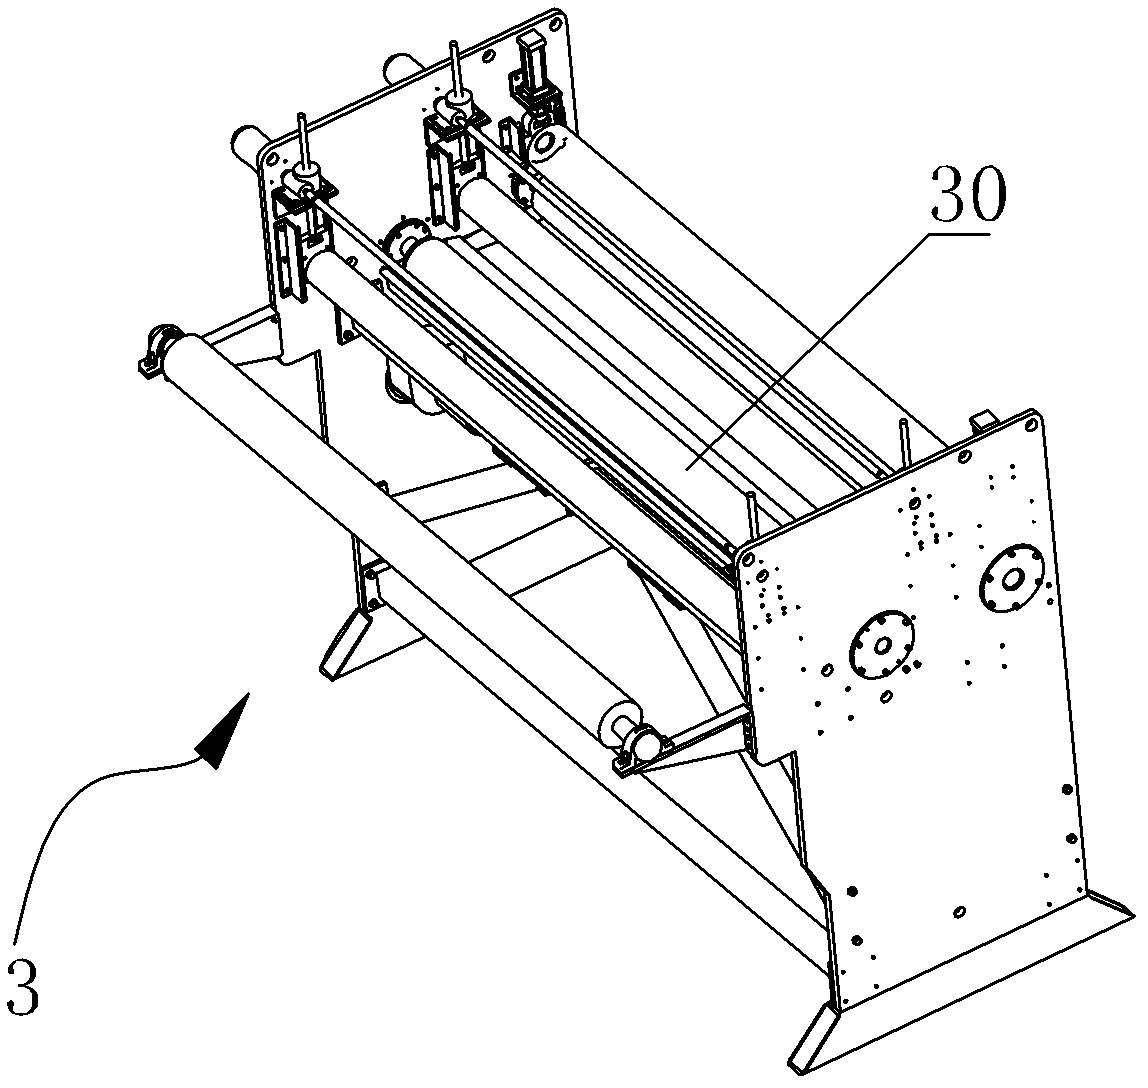 Non-woven online treating device